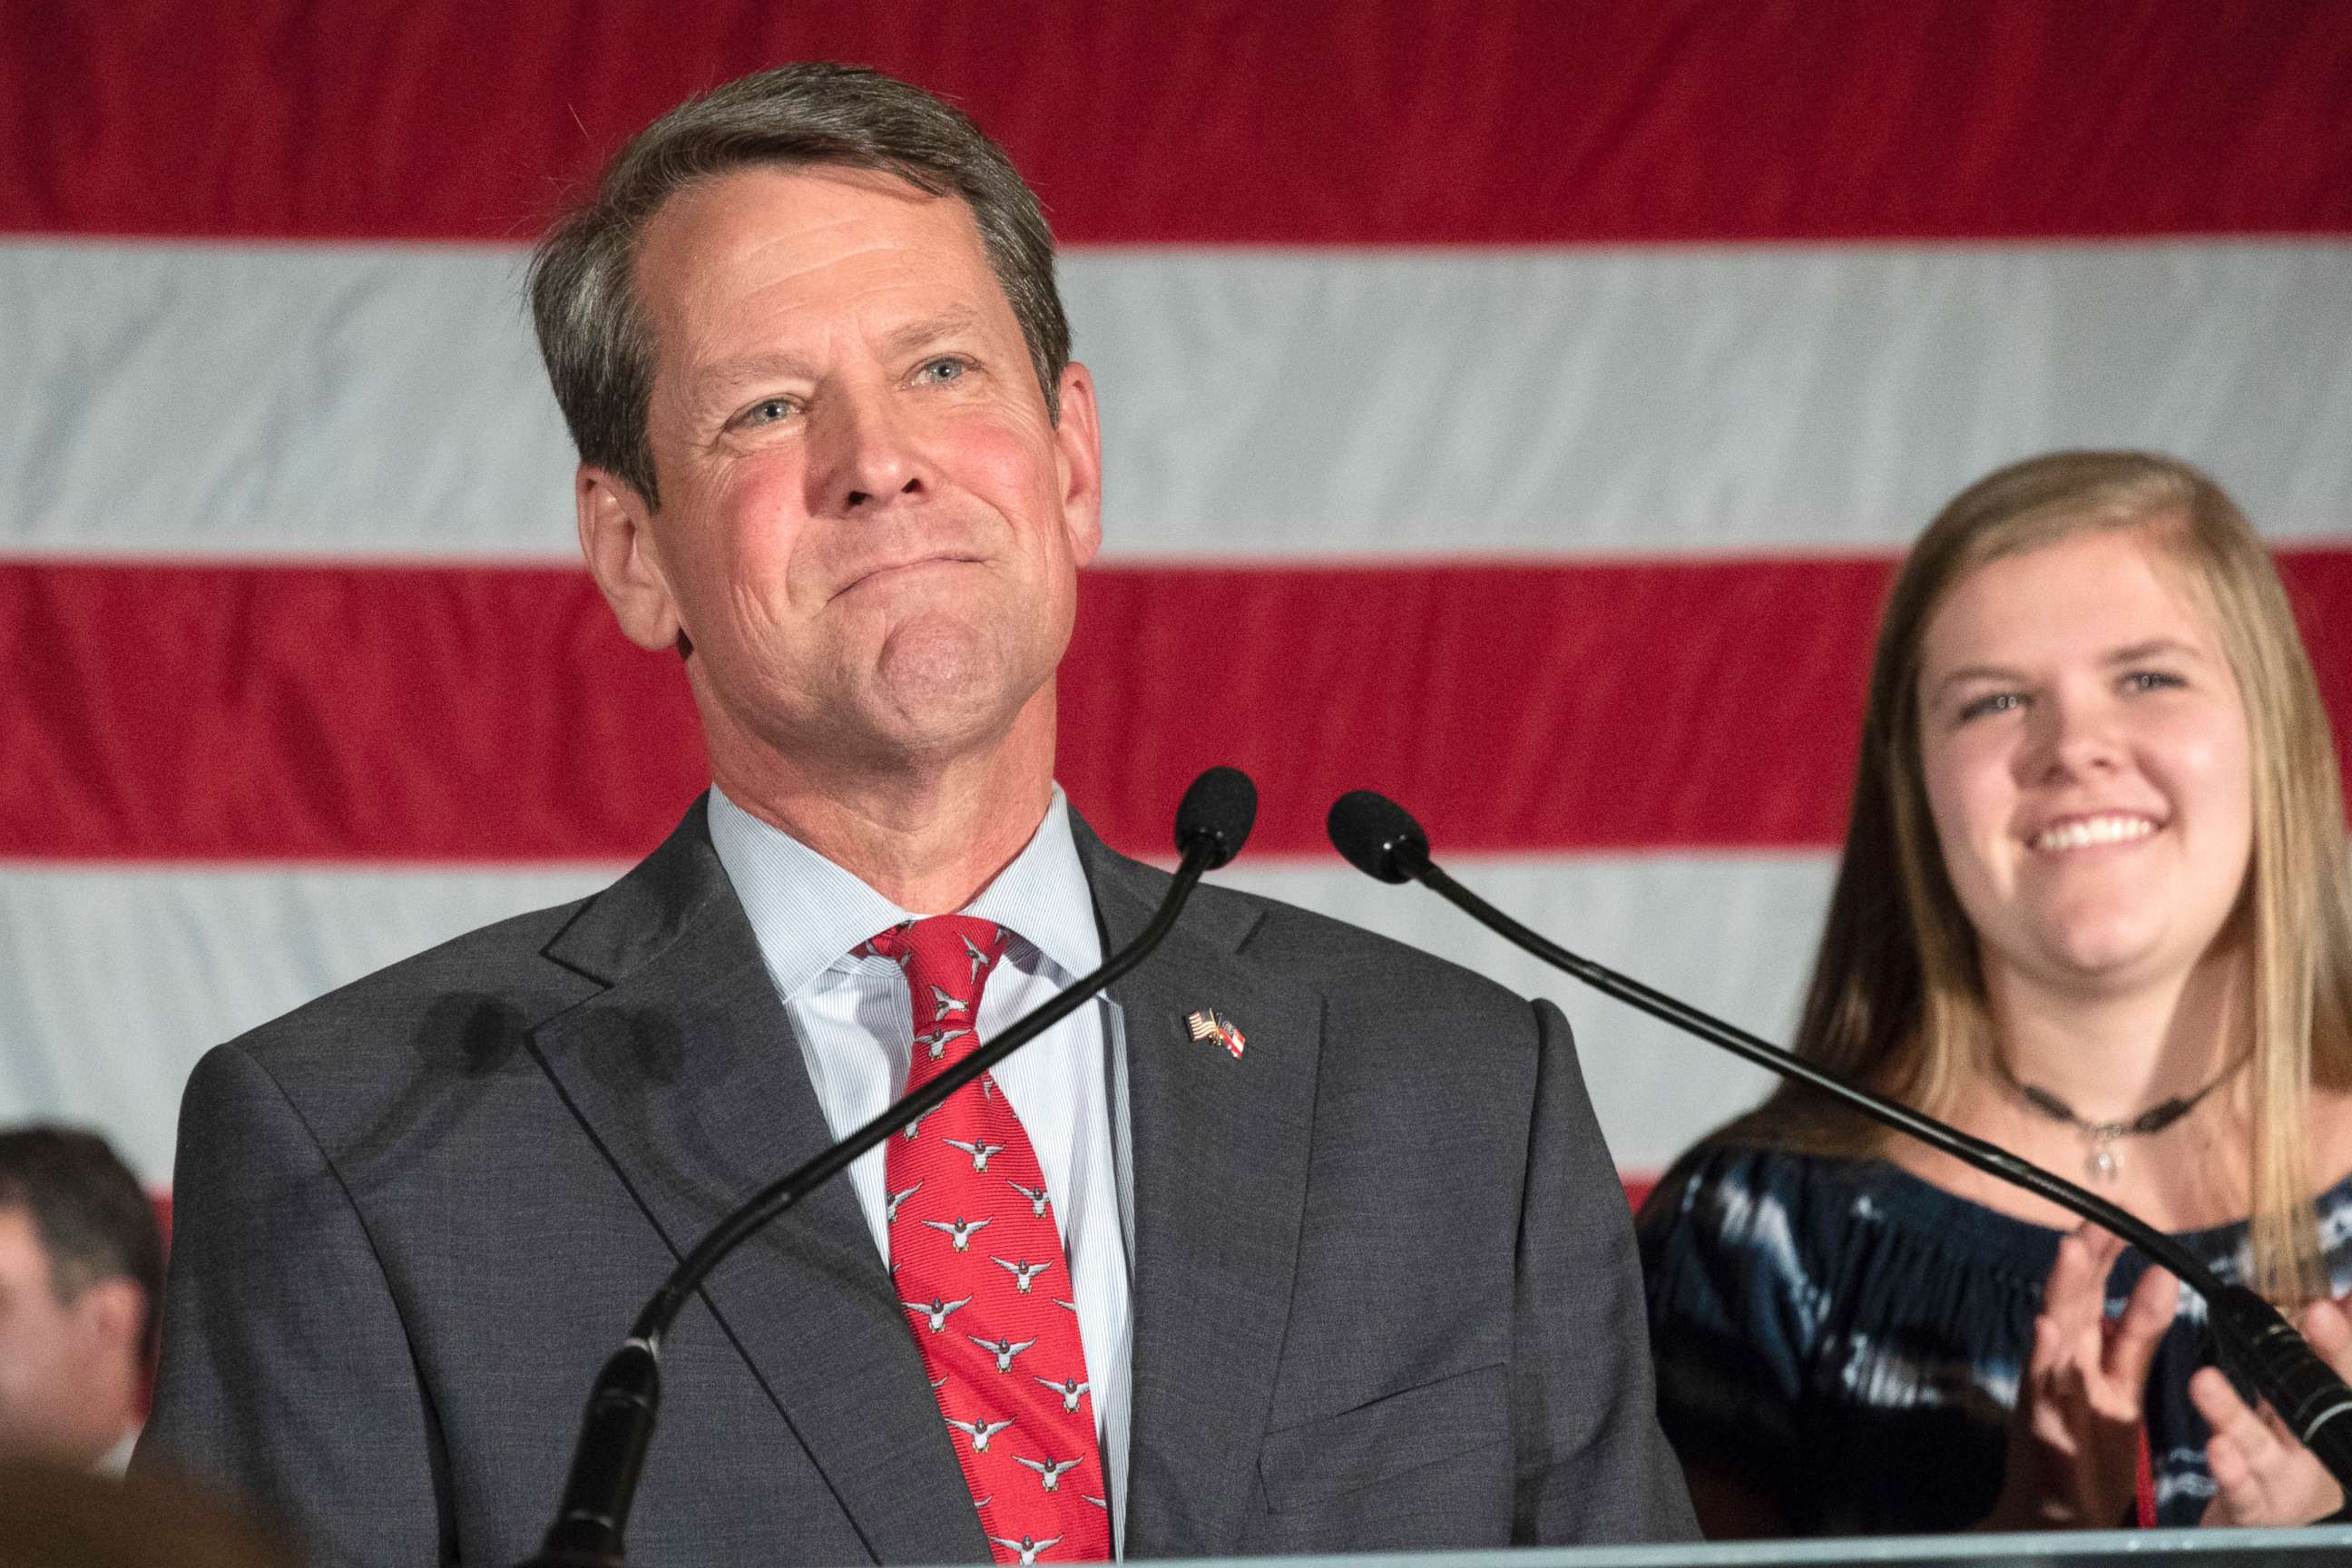 PHOTO: Georgia Secretary of State Brian Kemp appears during a unity rally with daughter Lucy behind him, July 26, 2018, in Peachtree Corners, Ga.